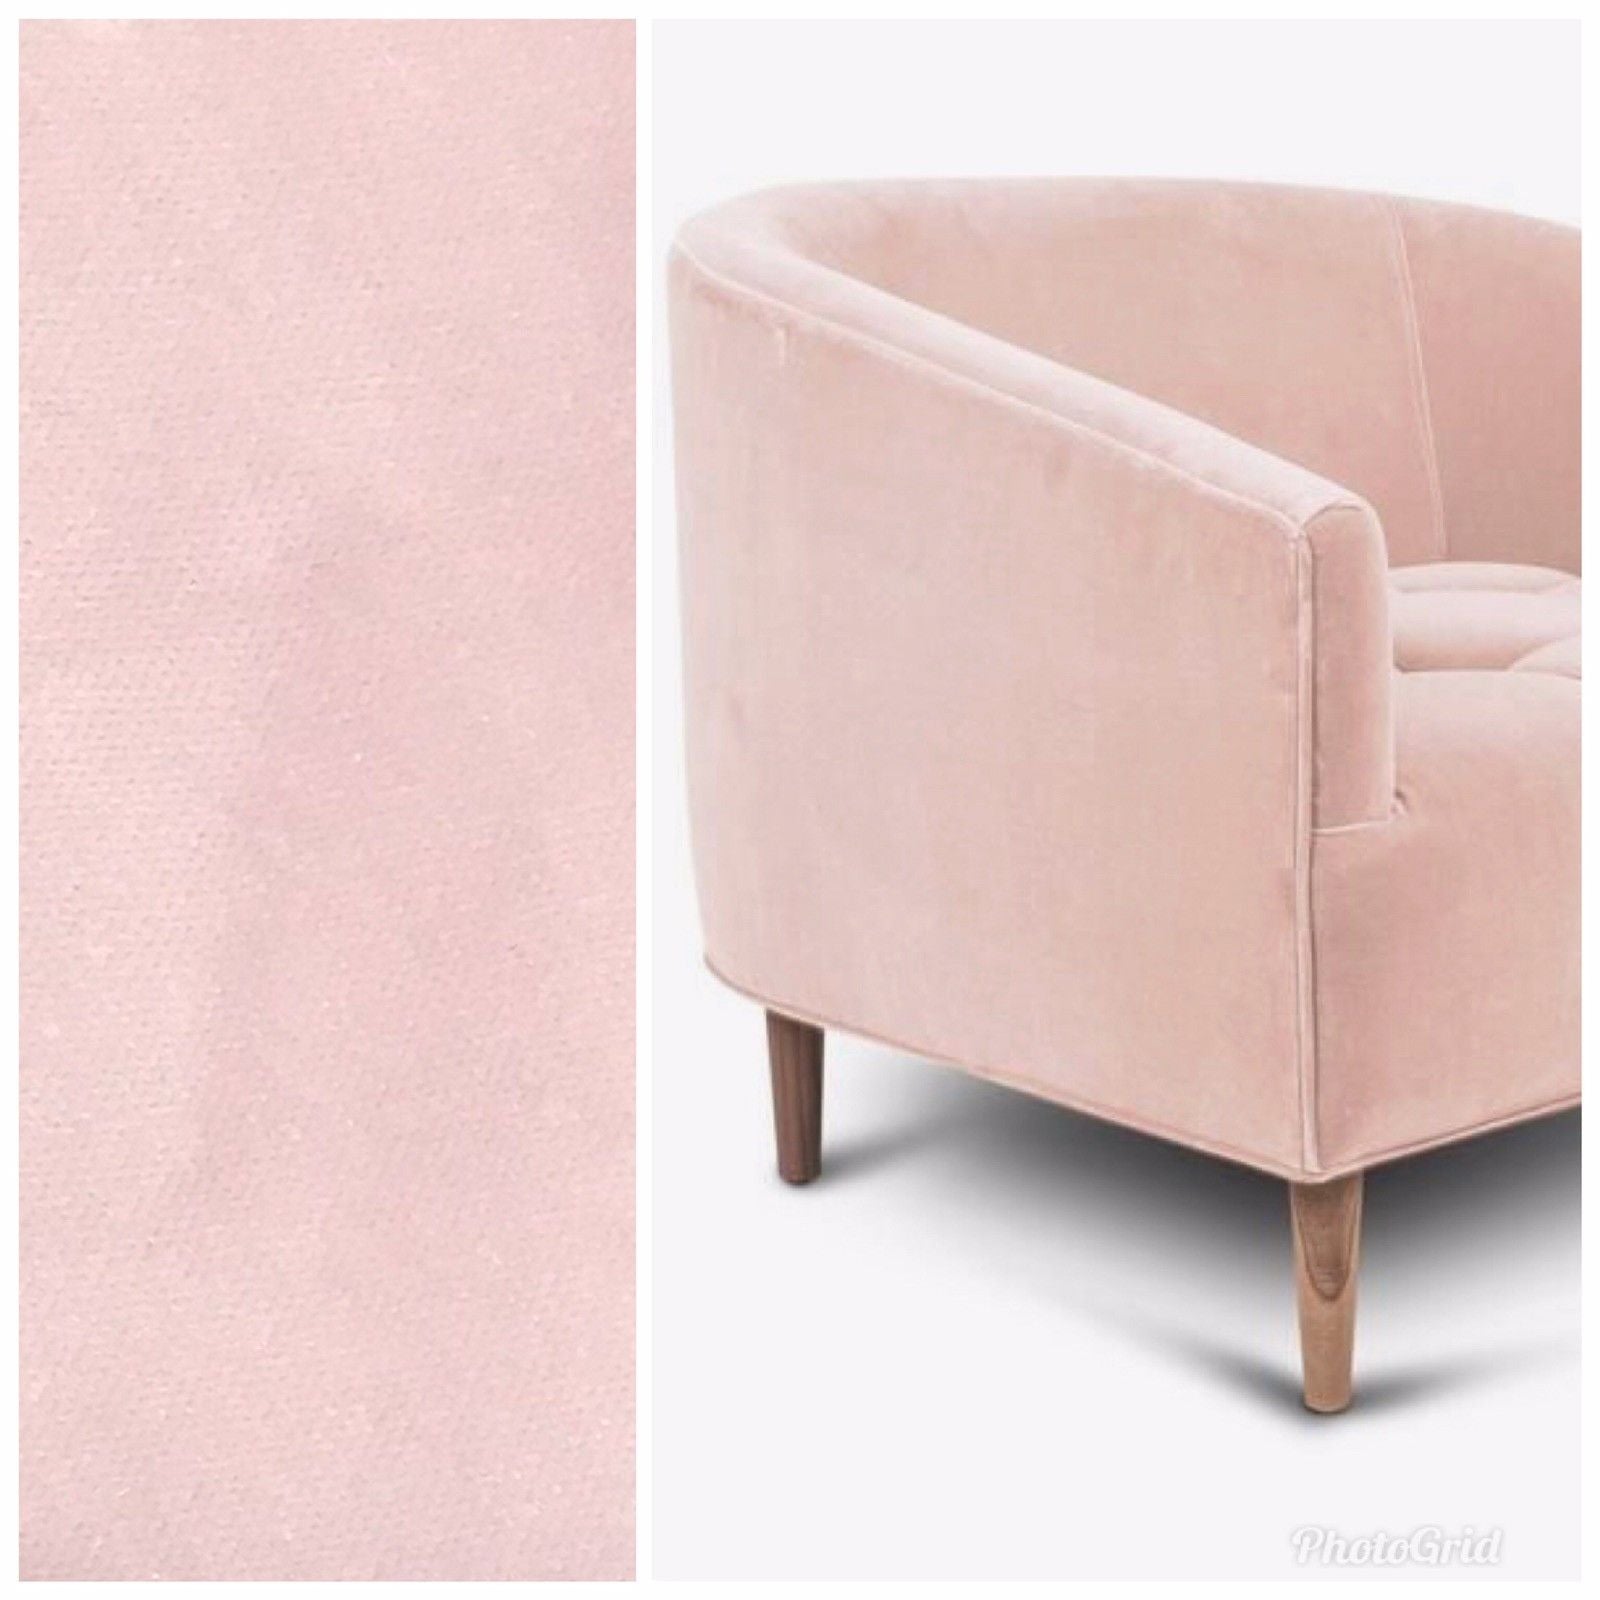 Peachtree Fabrics Pink Solid Color Velvet Upholstery and Drapery Fabric by Decorative Fabrics Direct